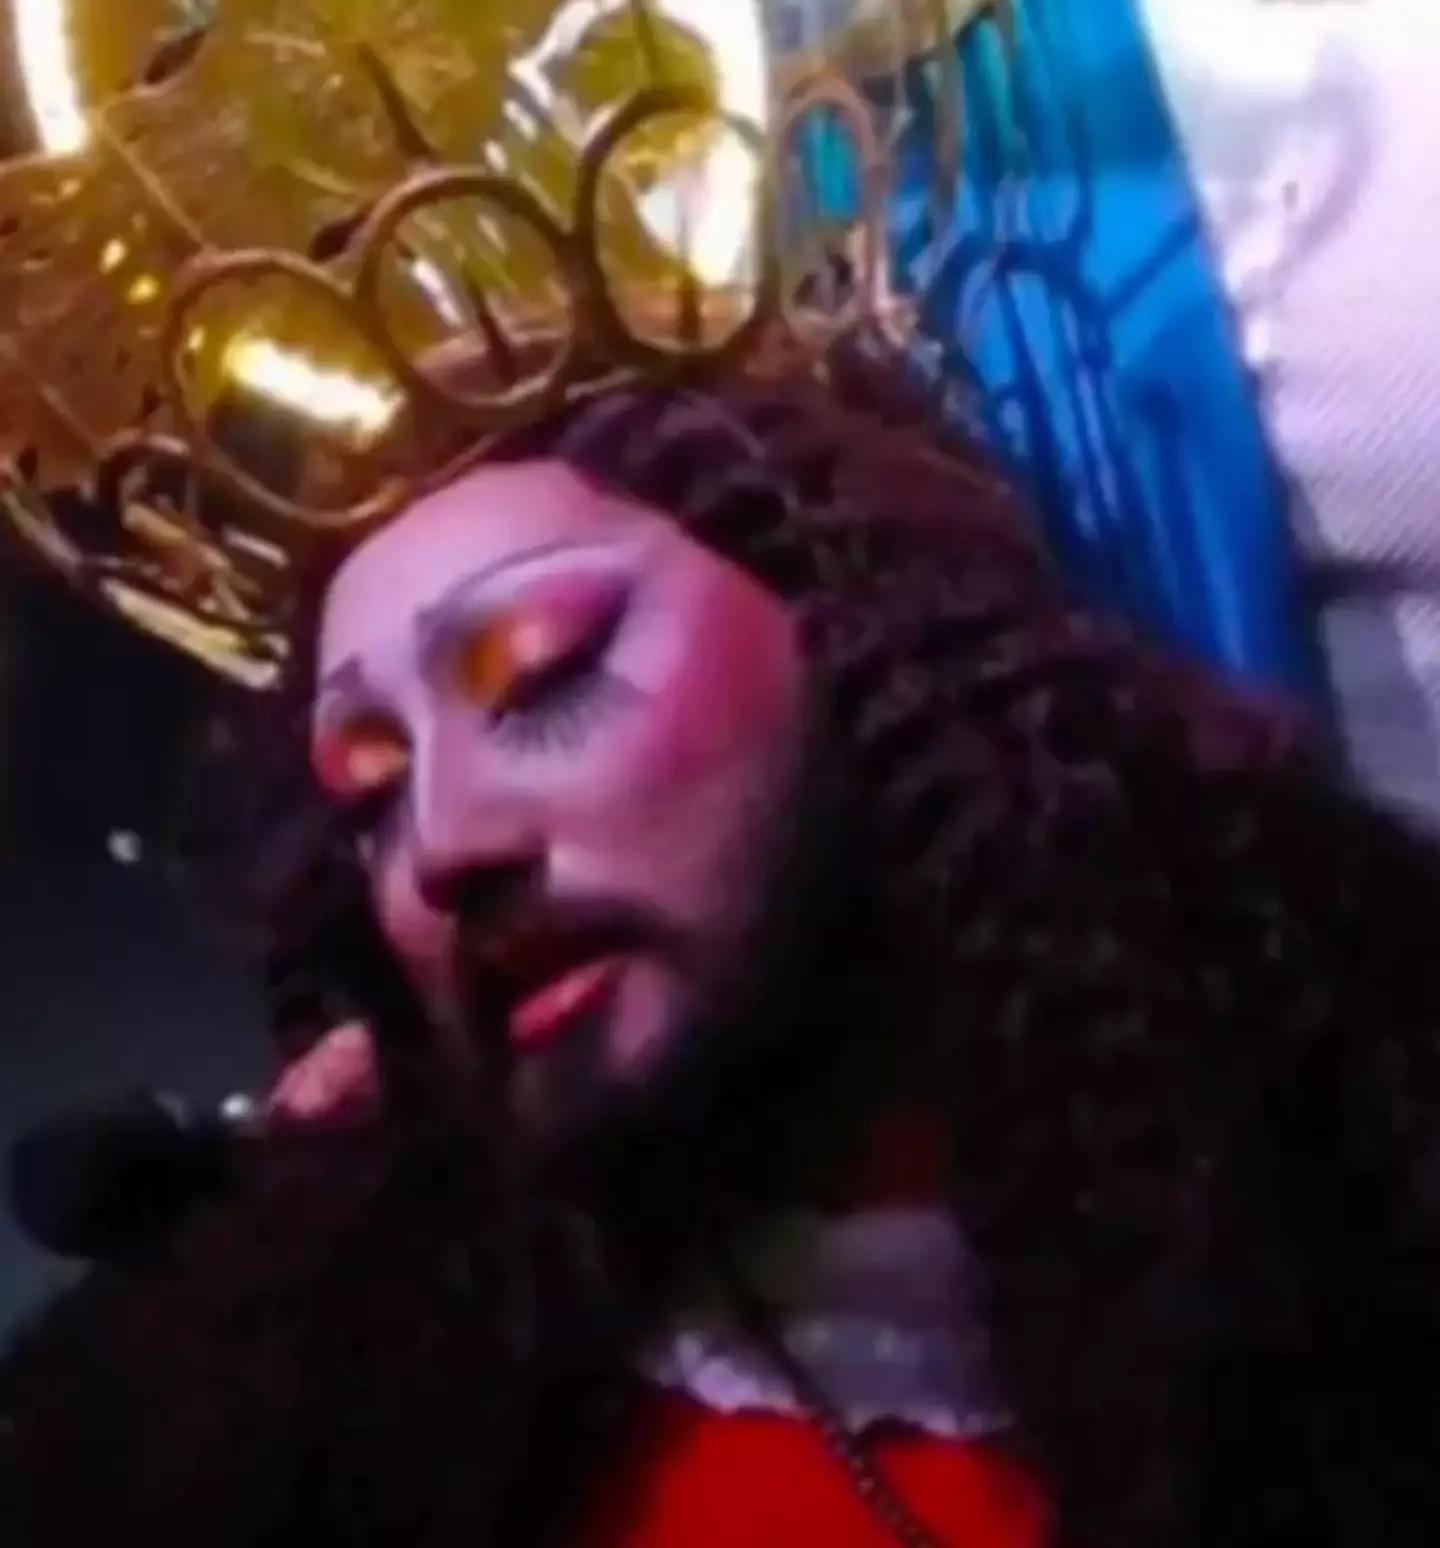 The controversial performance involved them dressing as Jesus.